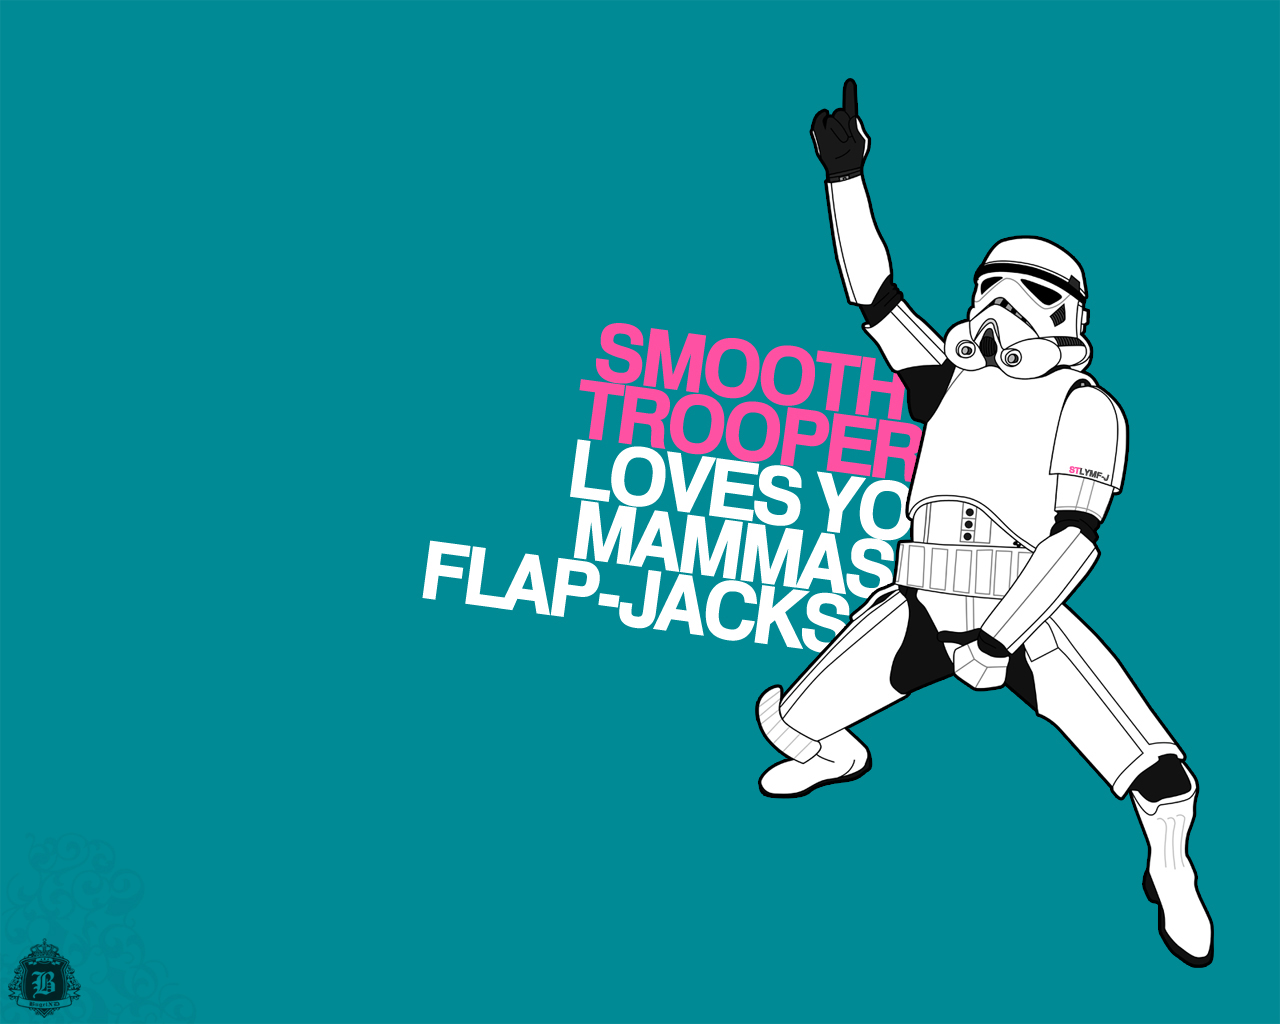 Gallery For Gt Funny Star Wars Wallpaper